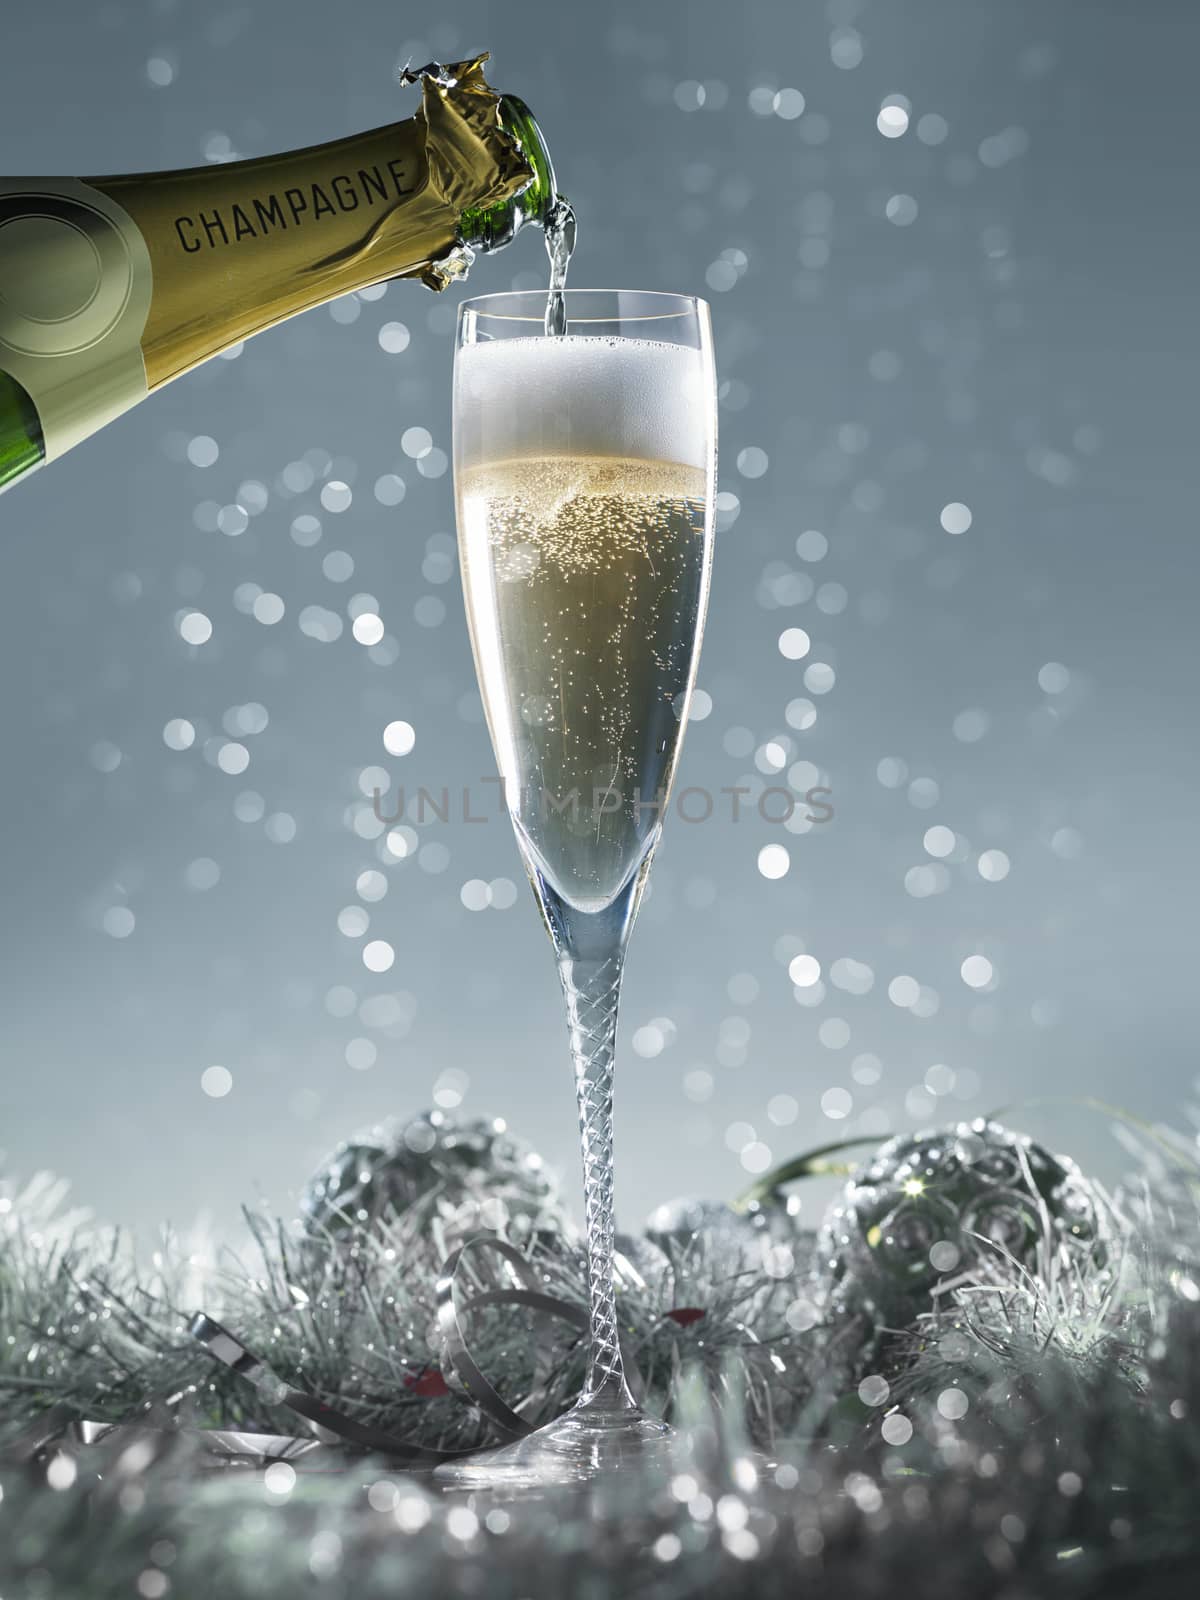 pouring champagne into the glass on a blue christmas background